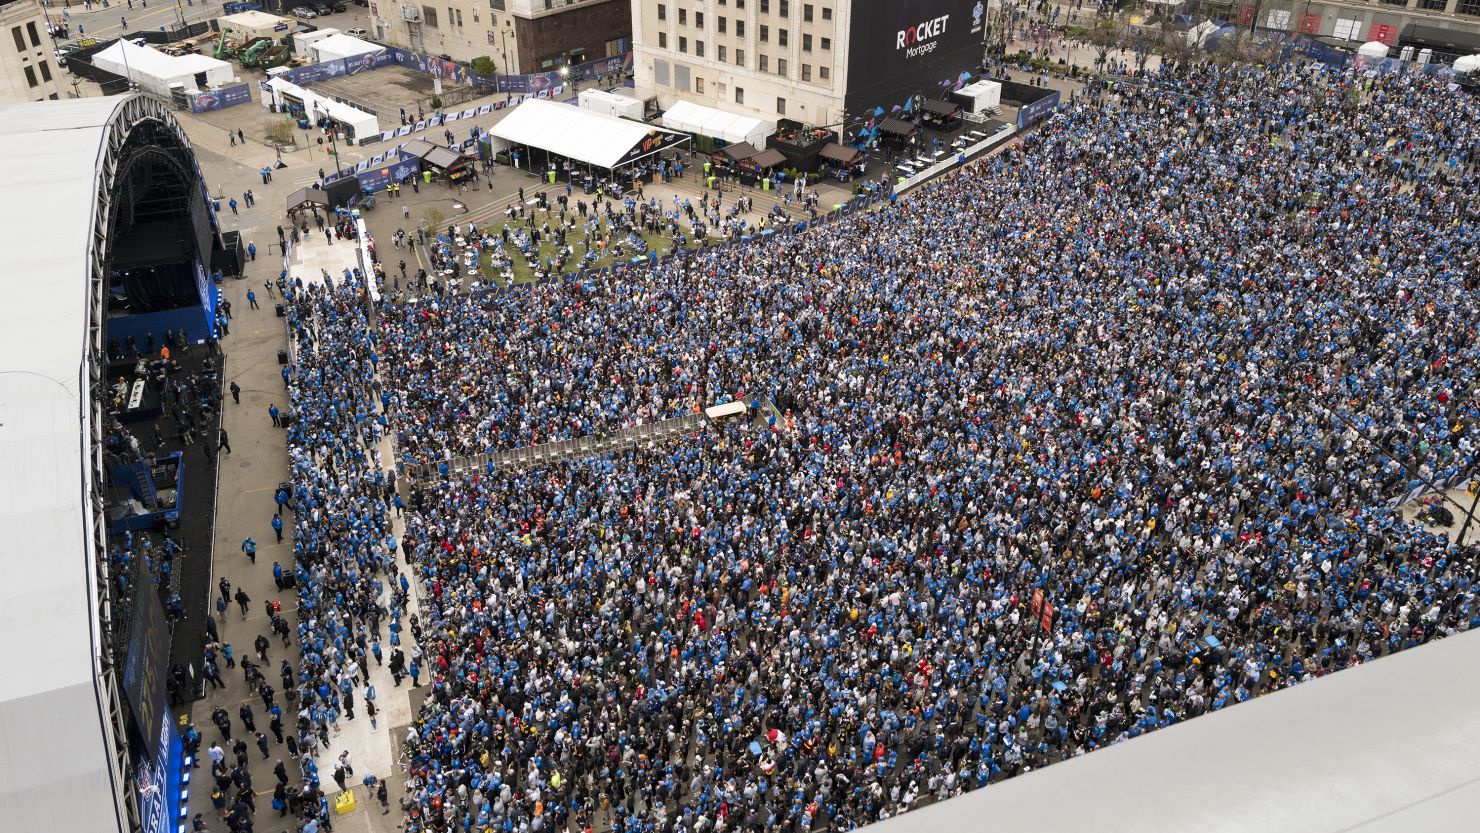 Detroit CRUSHED the NFL Draft Attendance record with 775k fans